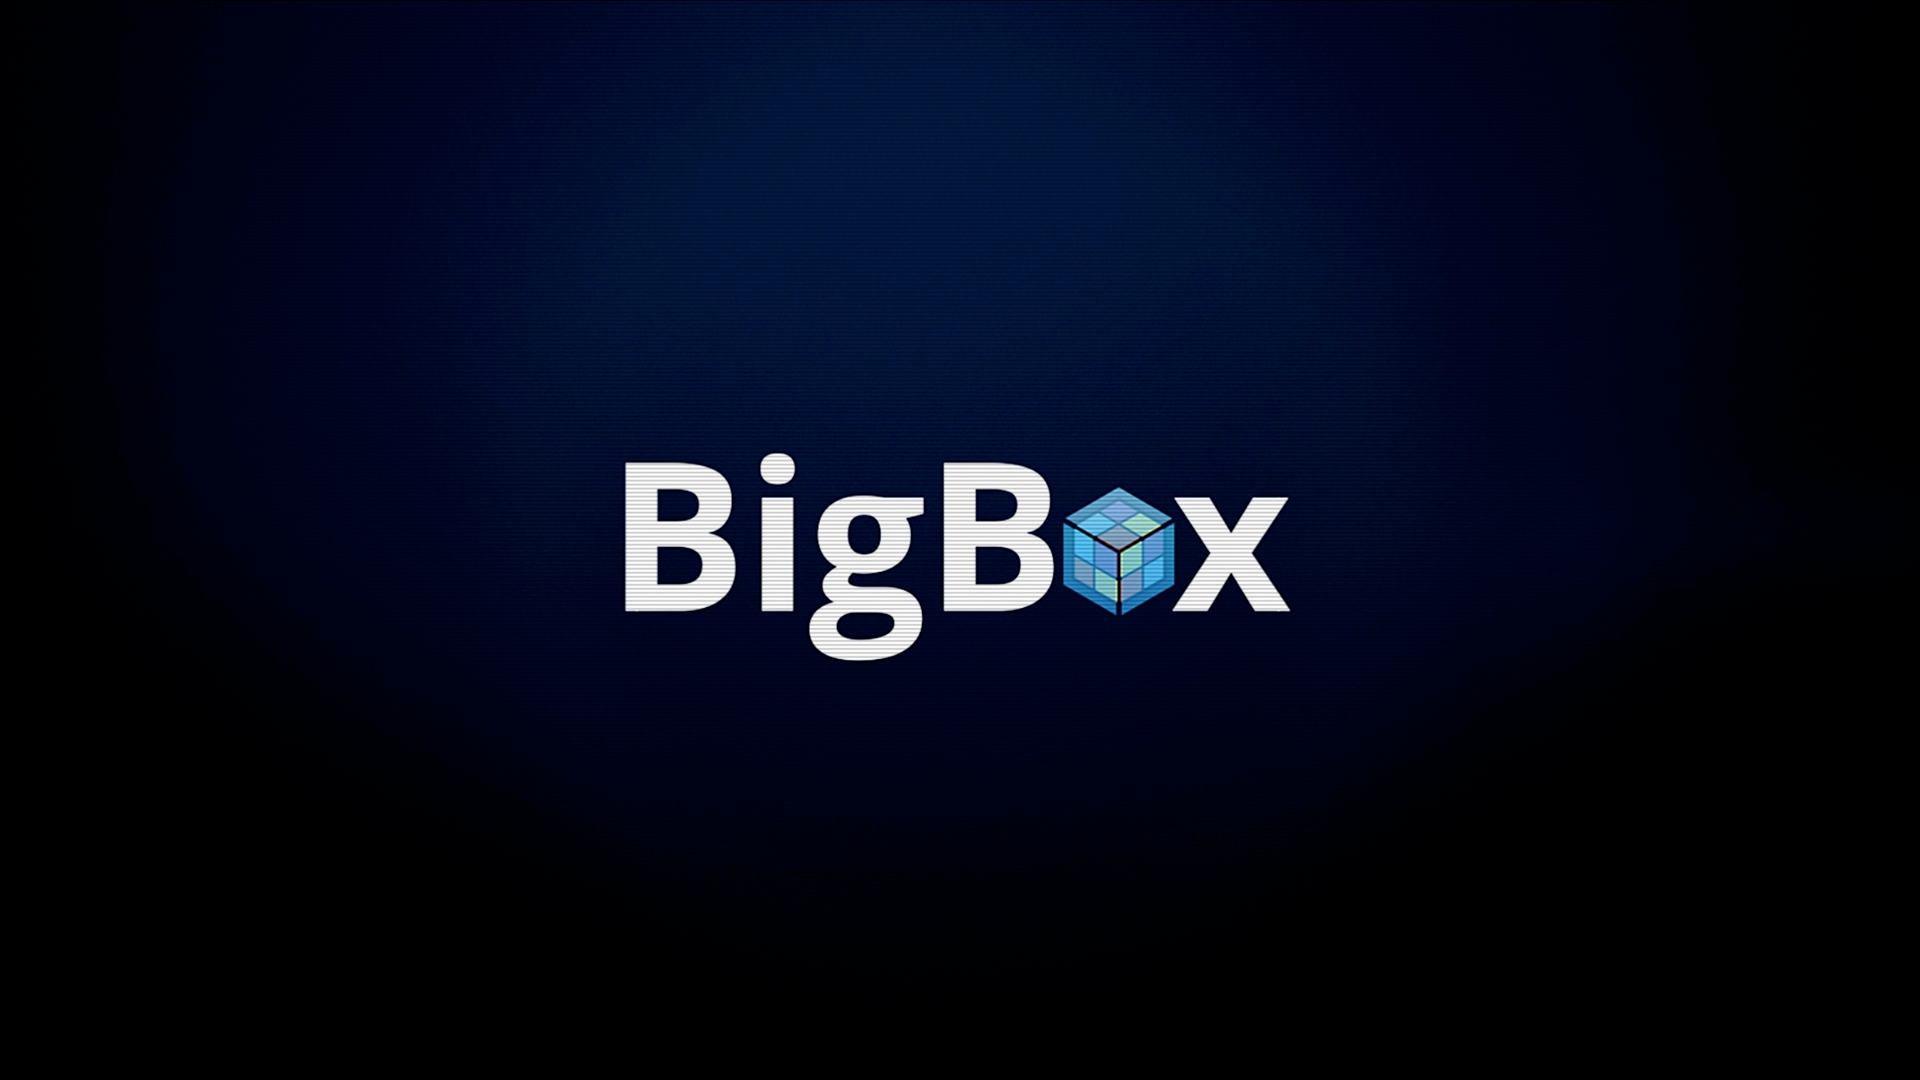 More information about "BigBox Particle Logo Reveal"